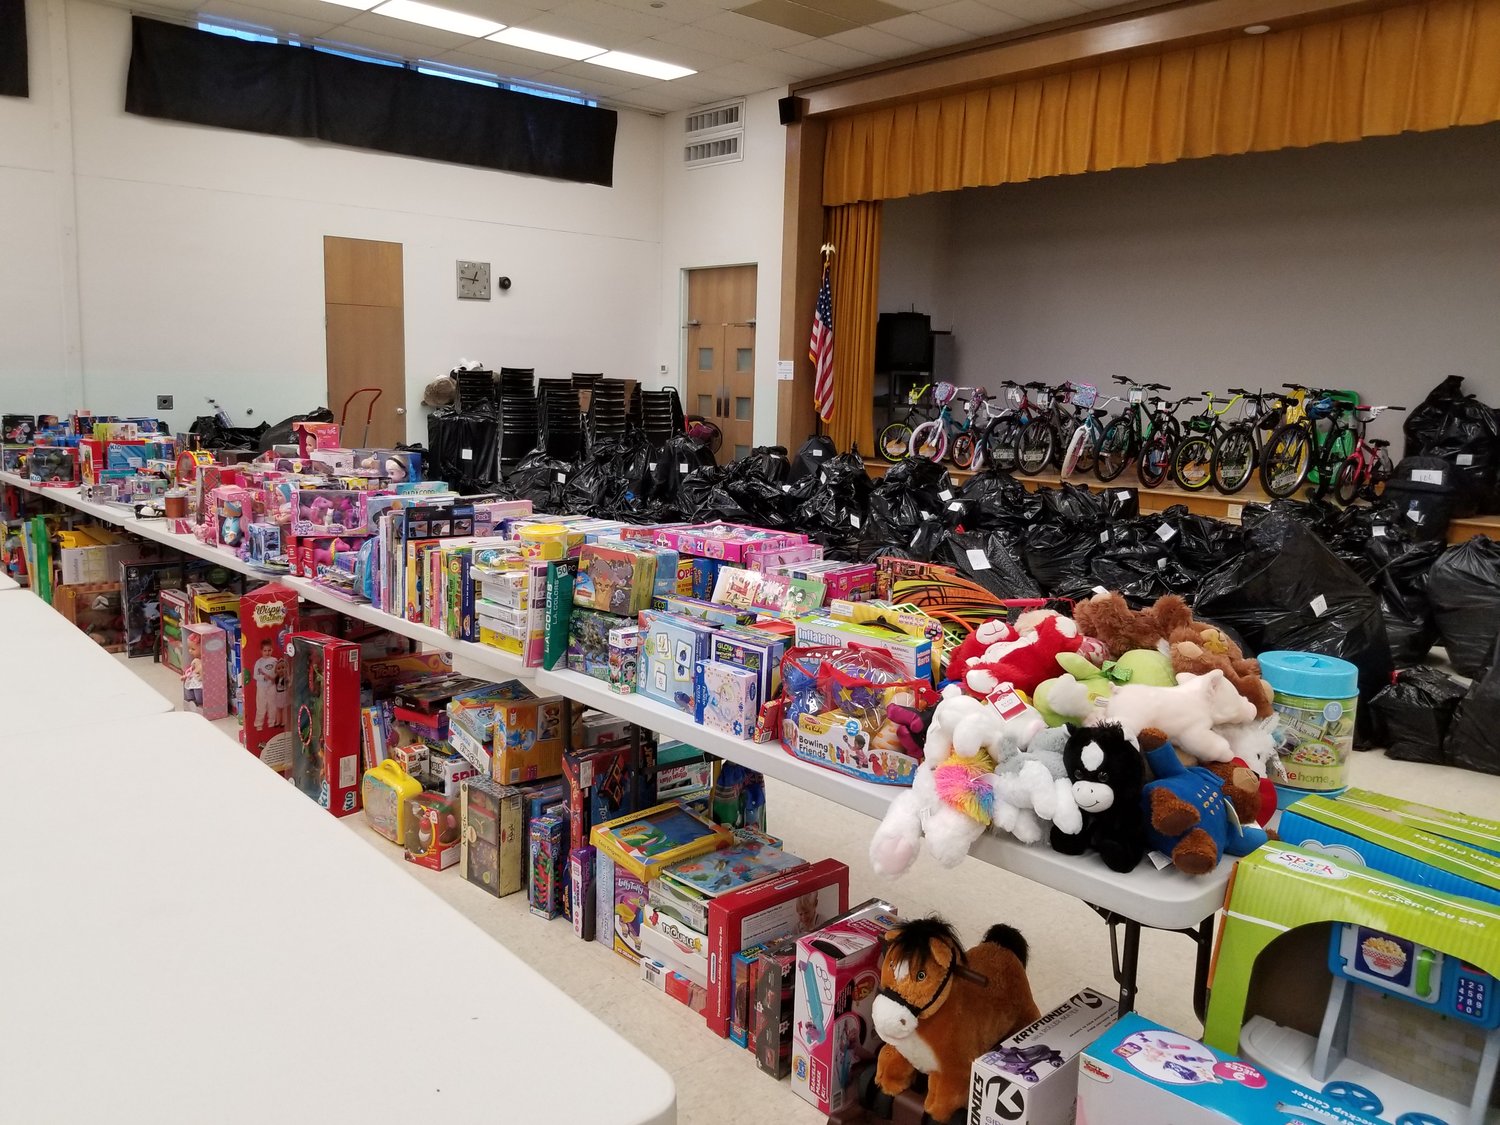 With the help of the entire community, the Children’s Christmas Bureau offers quite an array of presents on distribution day.